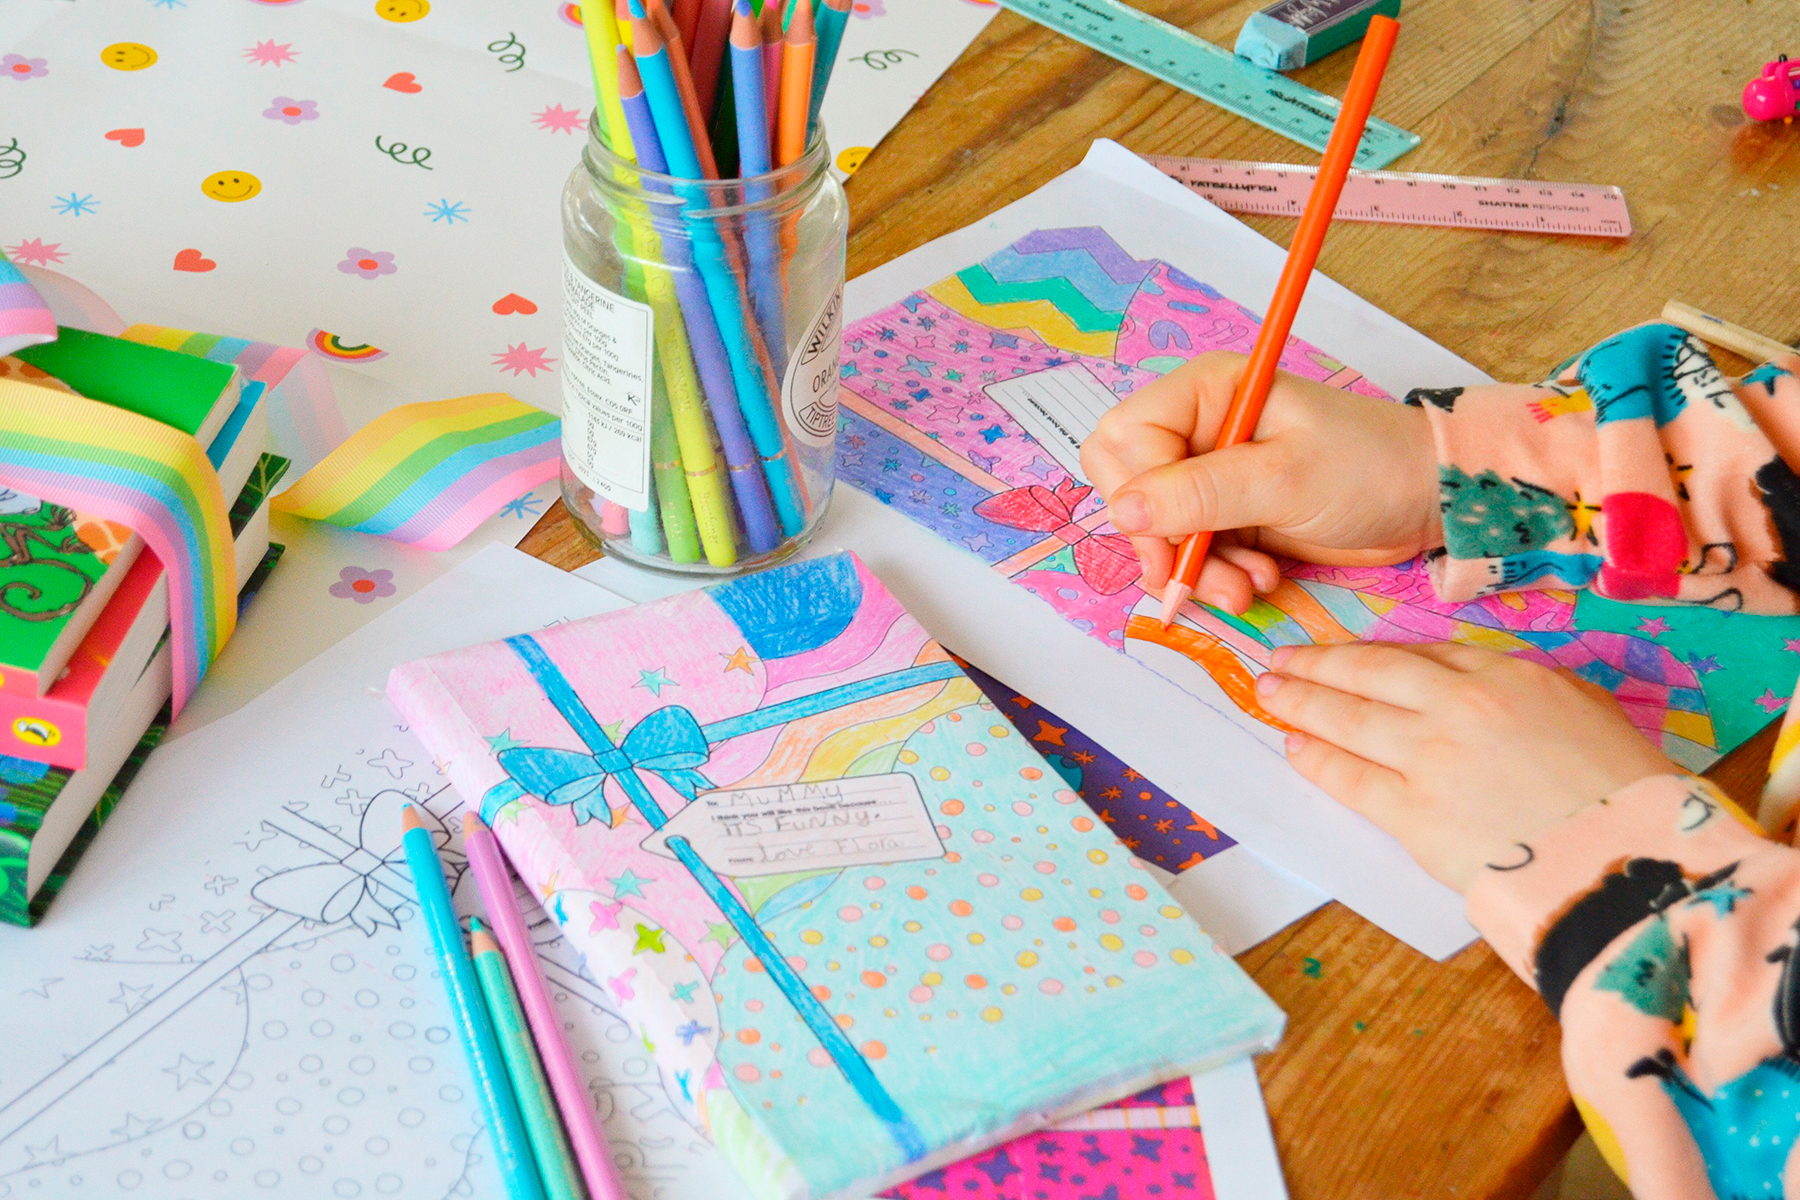 A photo of a child colouring in a book wrap on a wooden table. The child is surrounded by coloured pencils